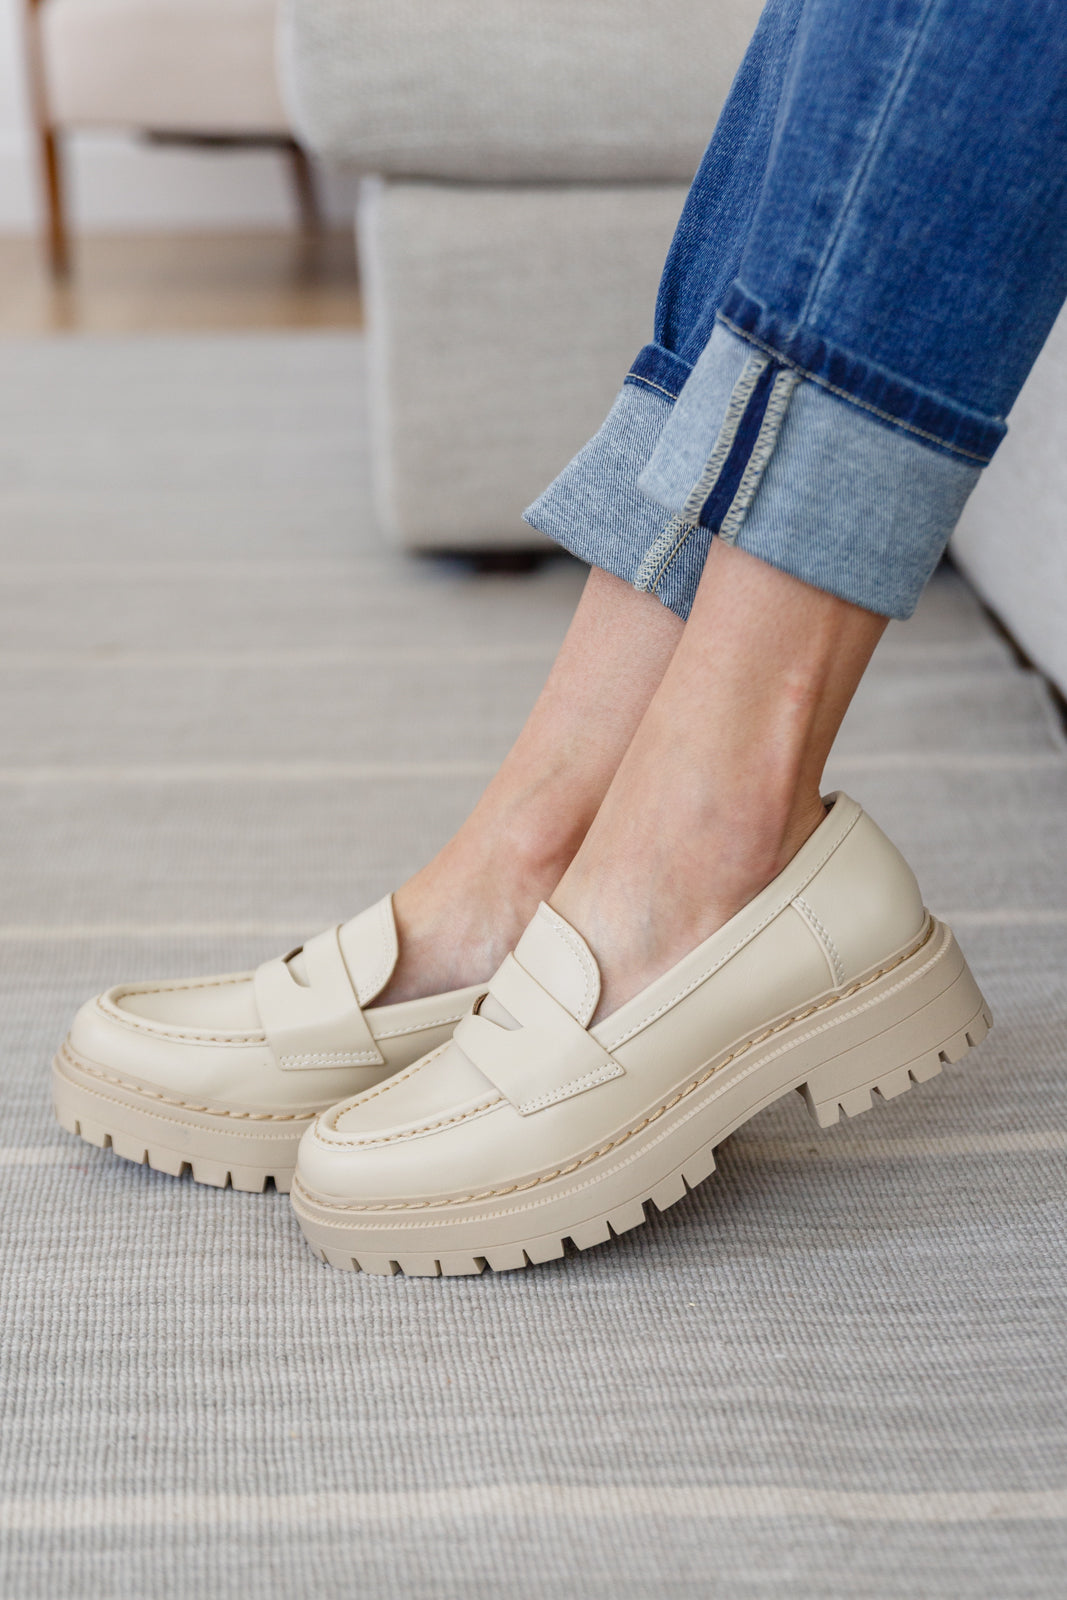 Penny For Your Thoughts Loafers in Bone - Dixie Hike & Style